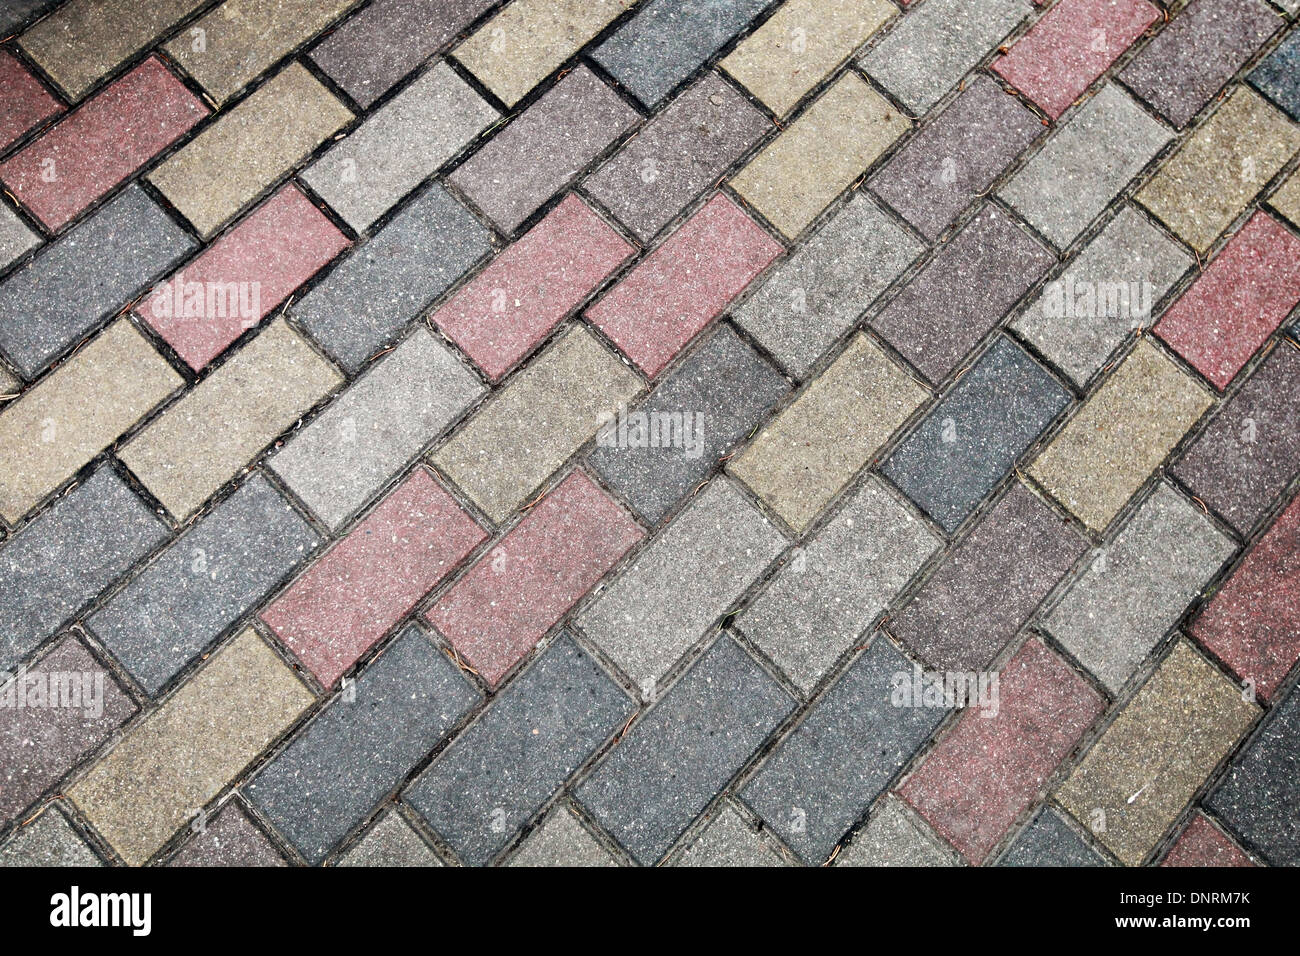 Road pavement pattern with colorful stones Stock Photo